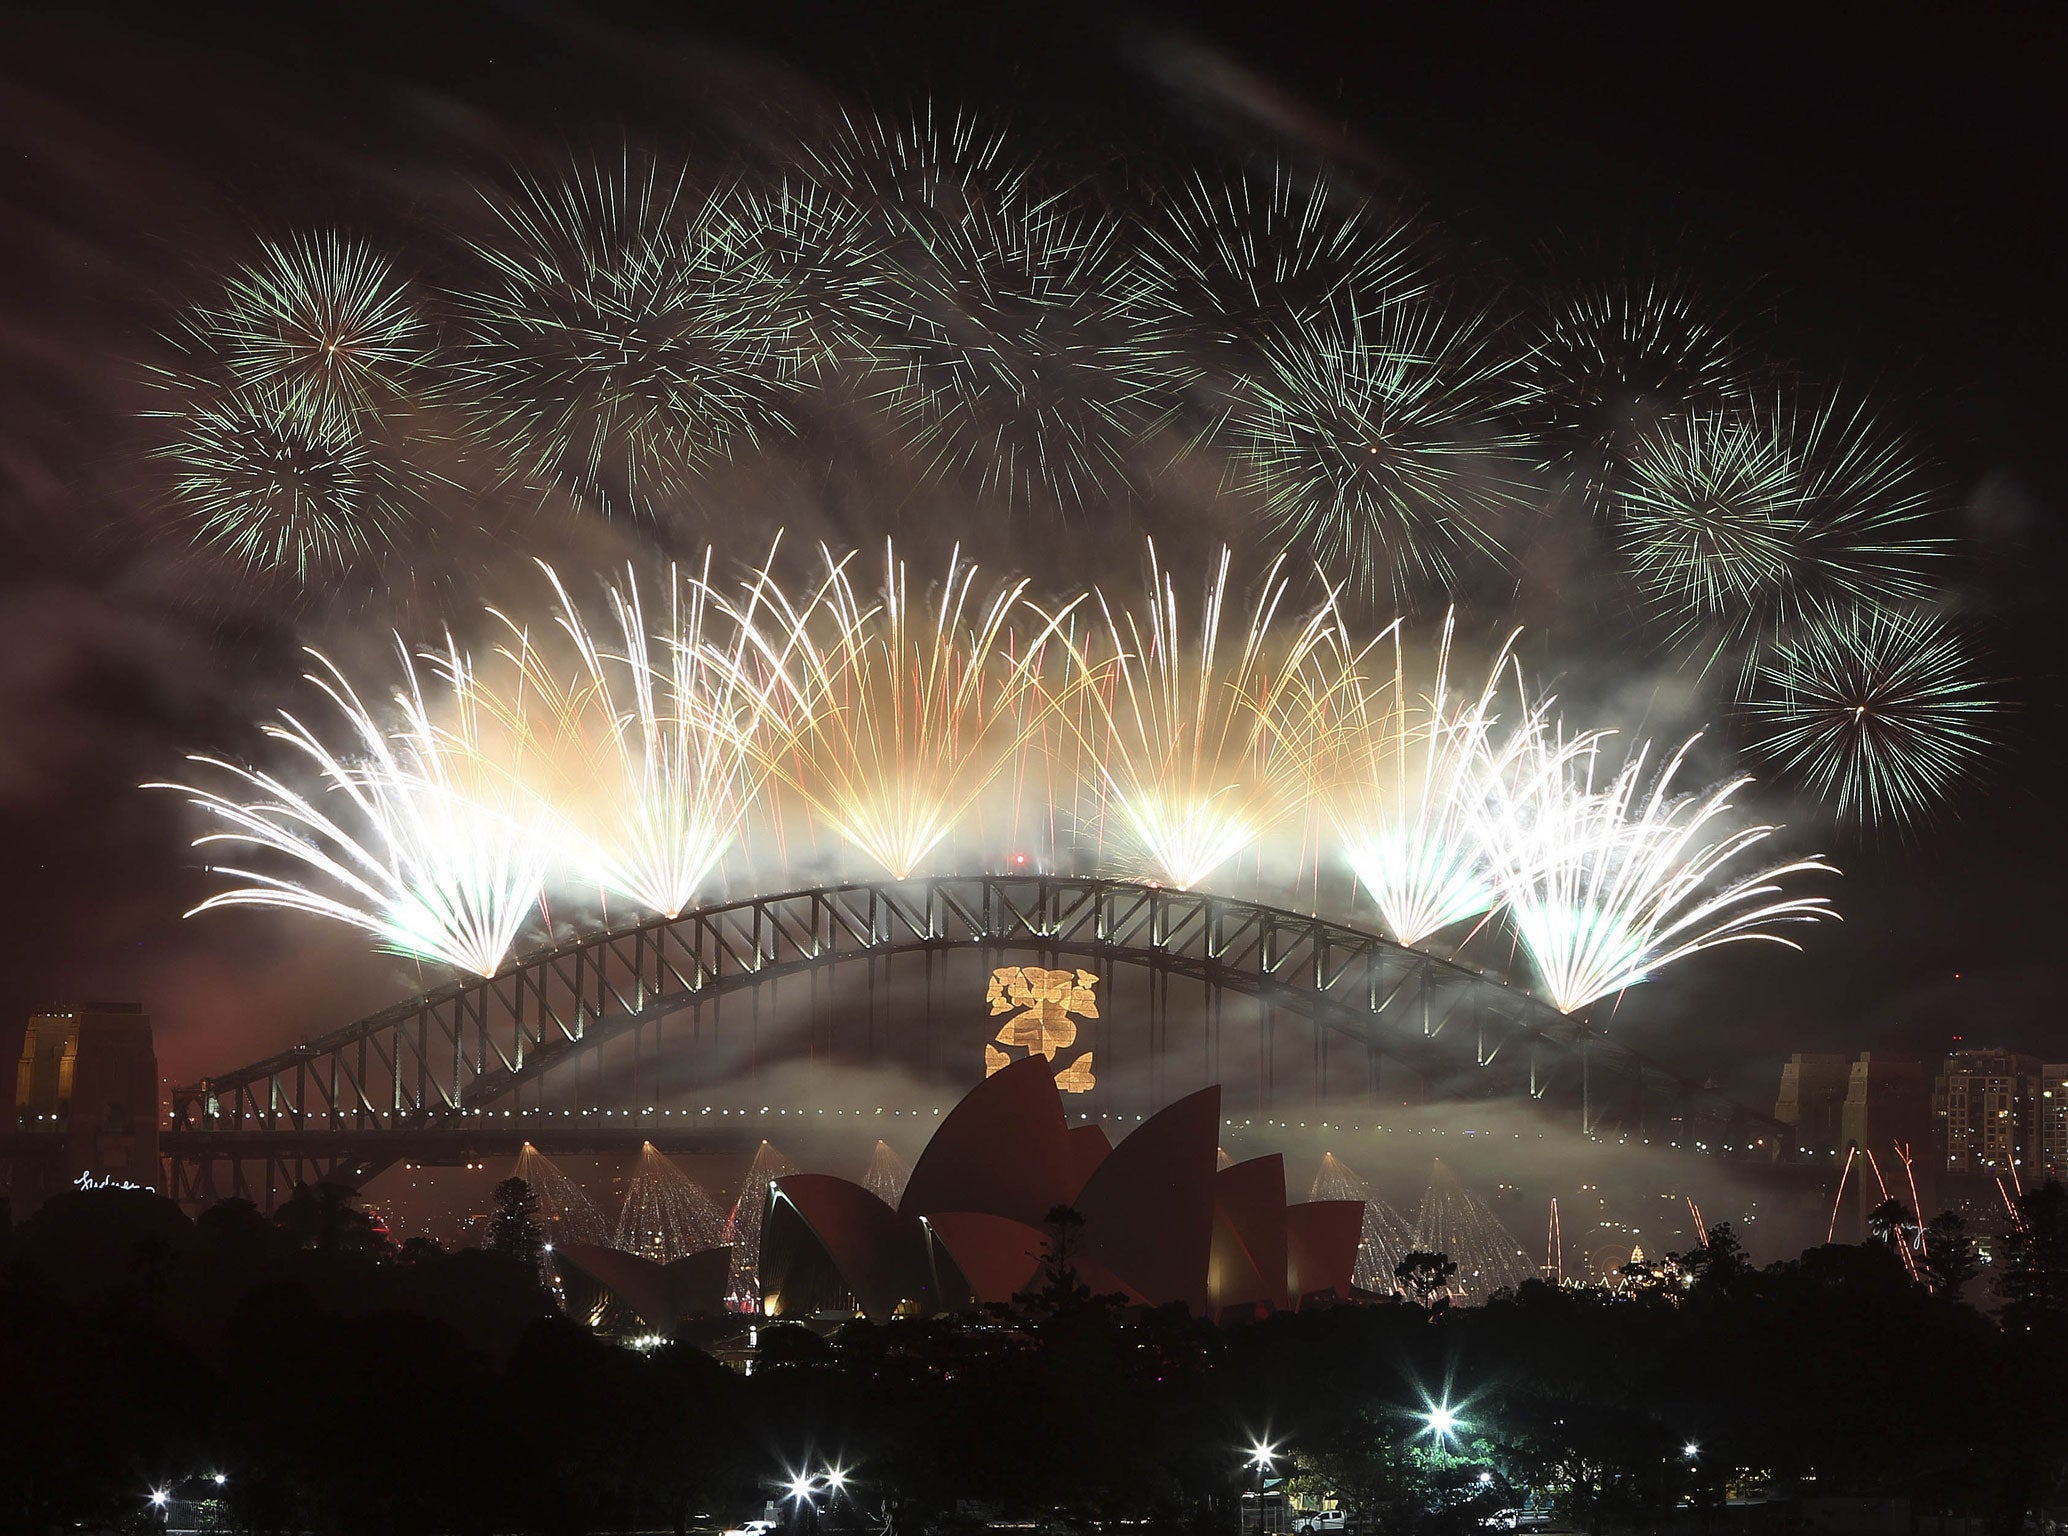 Fireworks explode in the sky above Sydney Harbour during the New Year celebrations